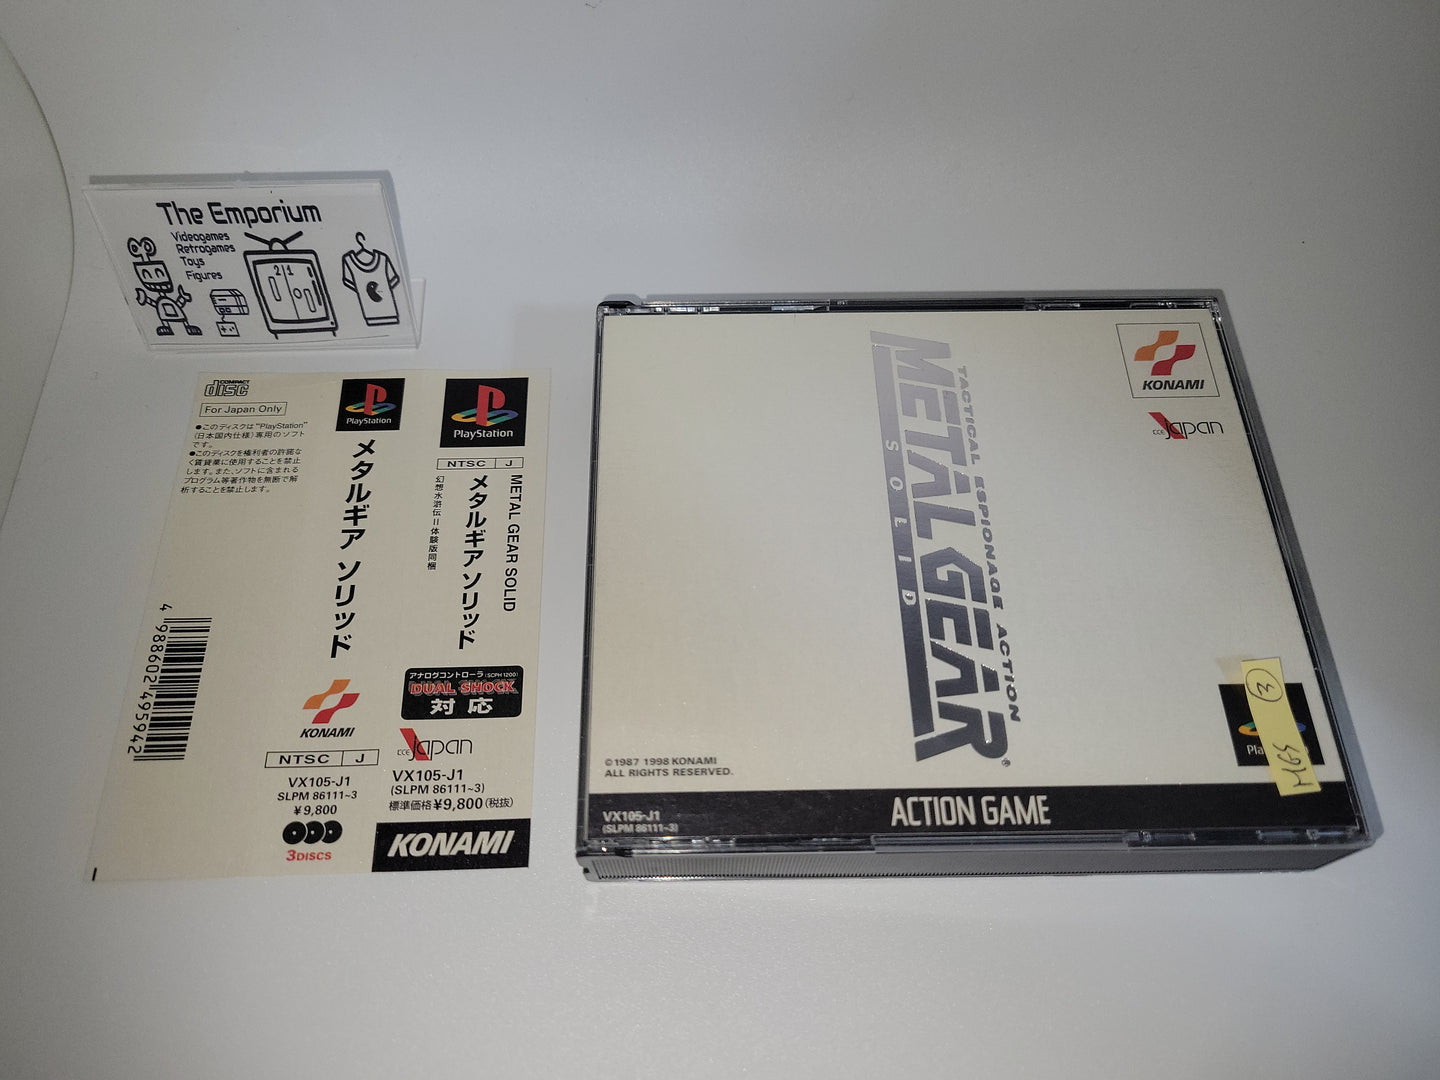 Metal Gear Solid (silver color cover version) - Sony PS1 Playstation